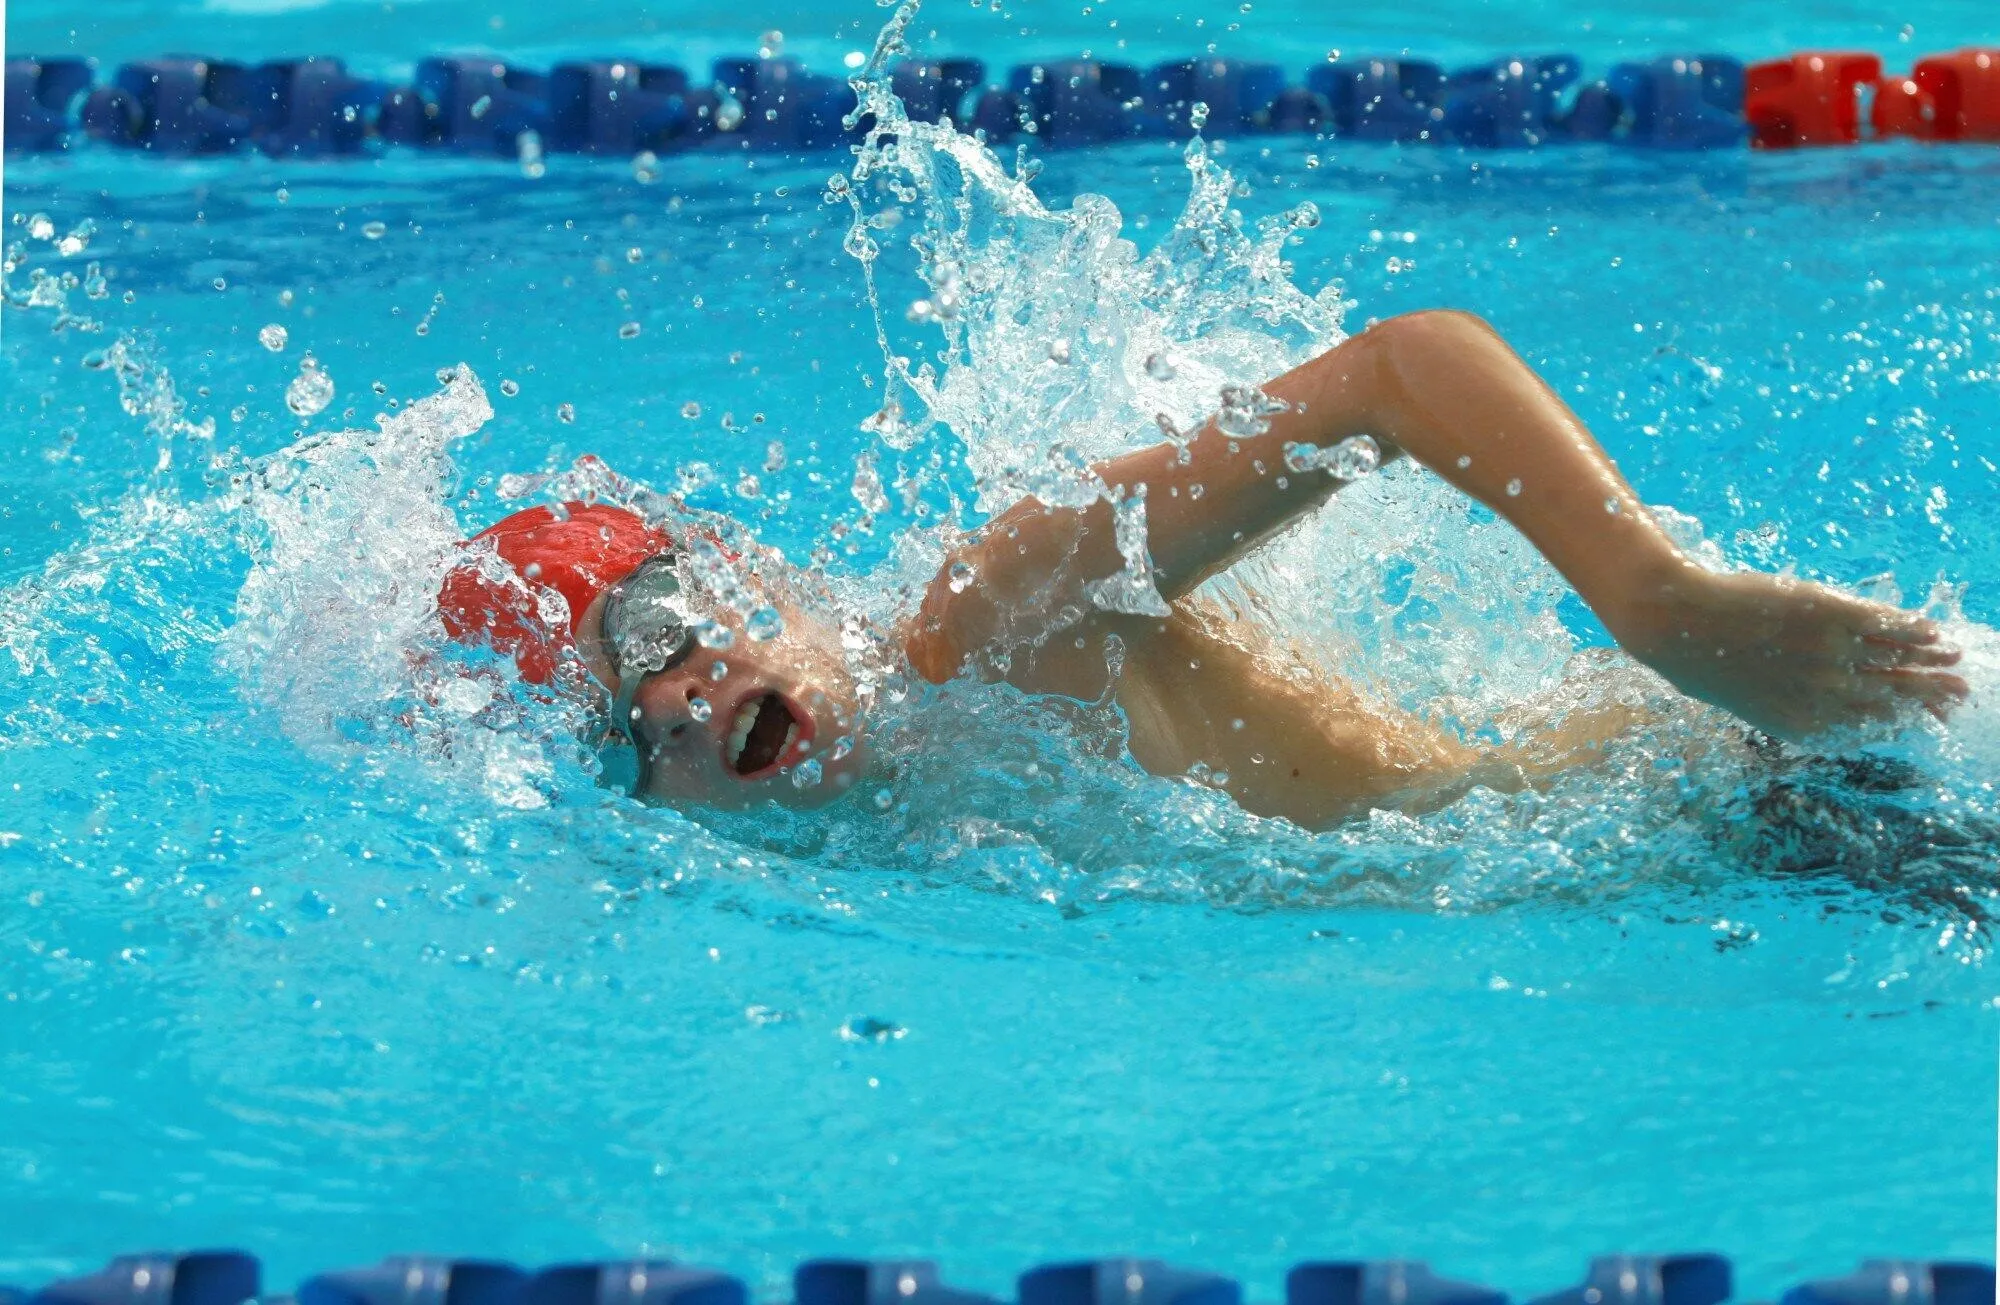 The Top Techniques for Dominating in Competitive Swimming Pool Races